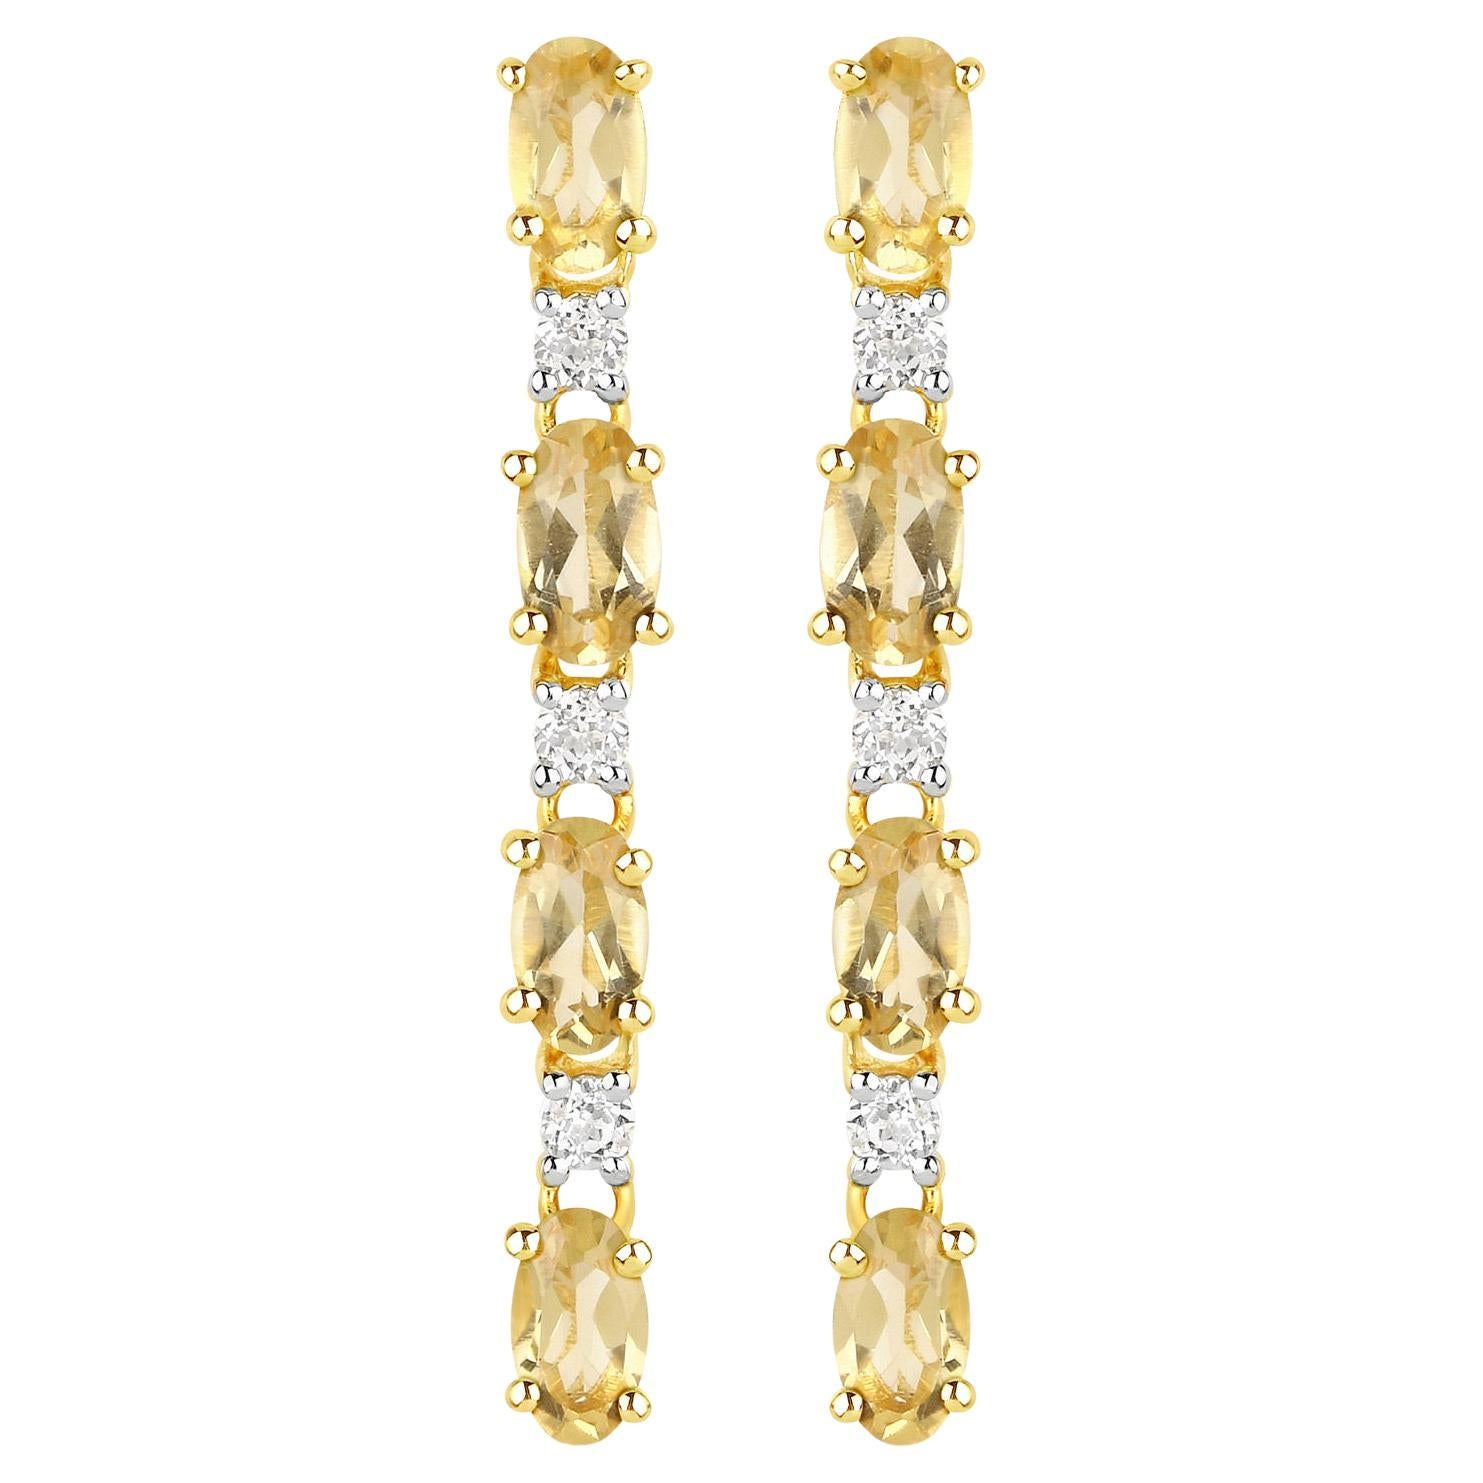 Natural Citrine and White Topaz Dangle Earrings 1.84 Carats Total For Sale